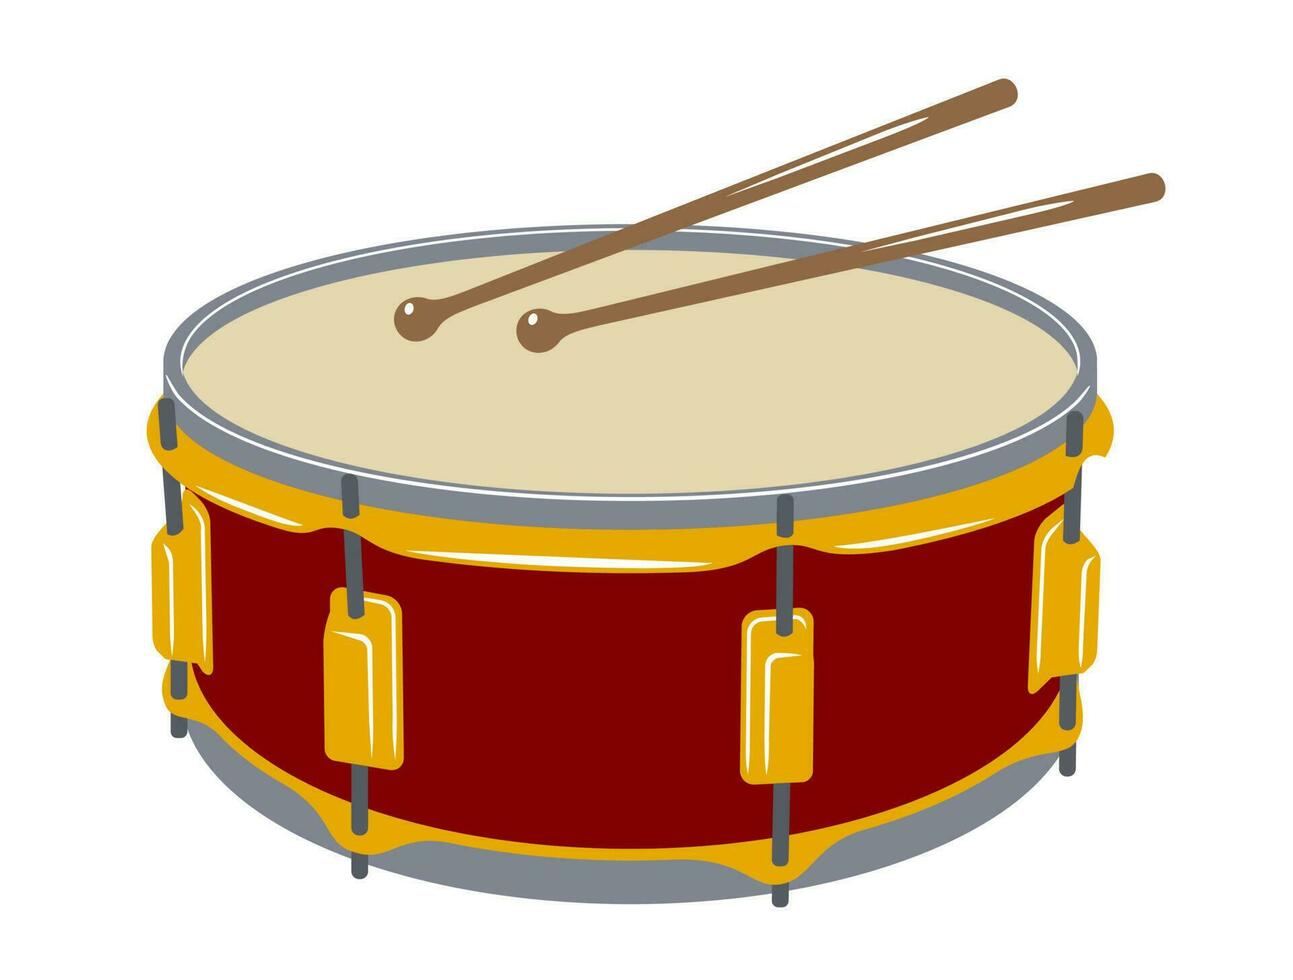 Bass drum and drumsticks. Musical instrument. Vector clipart isolated on white.